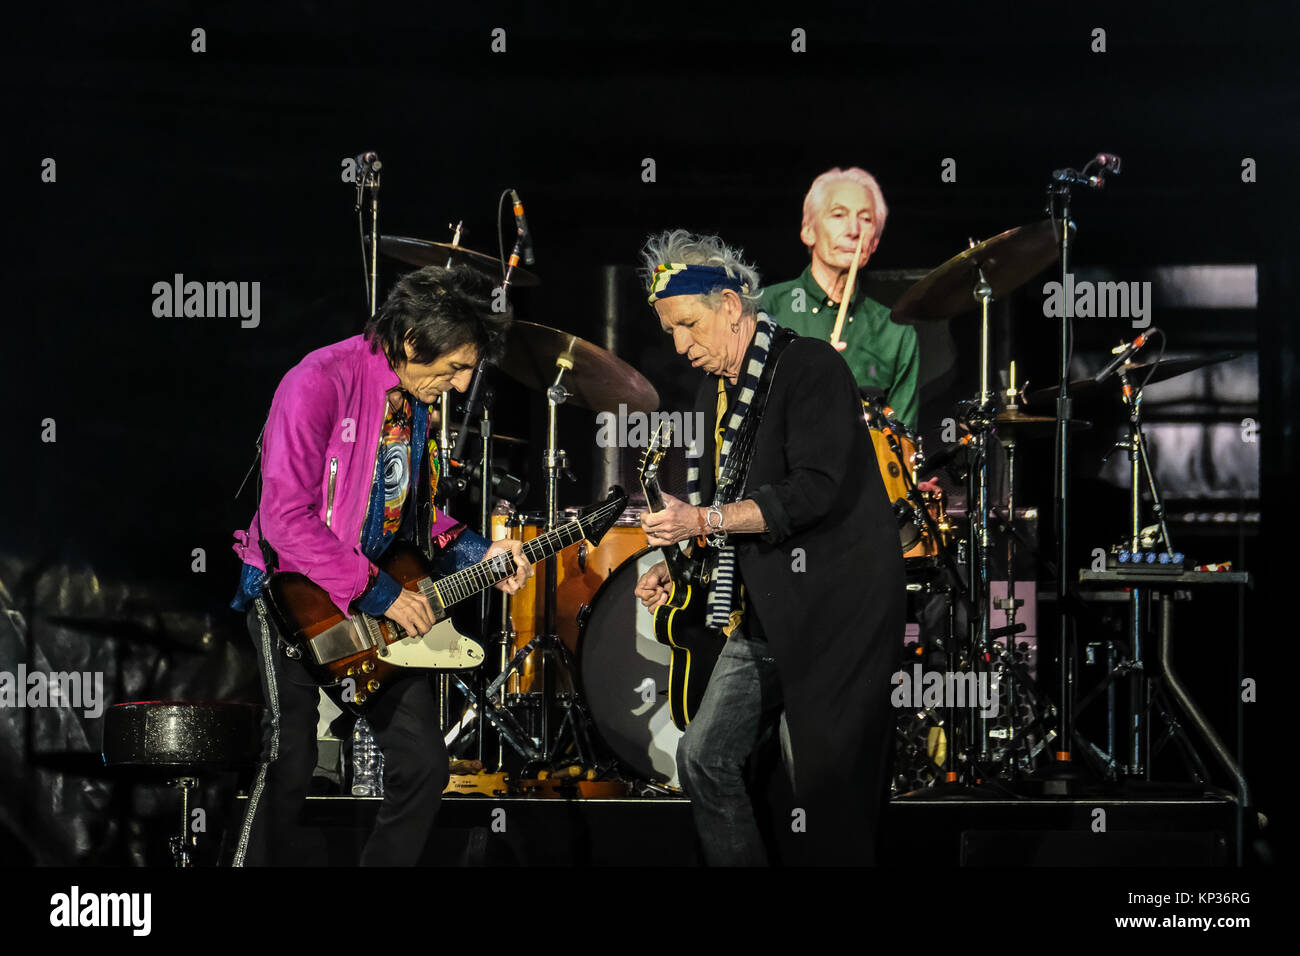 Switzerland, Zurich - September 20, 2017. The Rolling Stones, the legendary English rock band, performs a live concert at the Letzigrund Stadium in Zurich. Here guitarists Keith Richards (R) and Ronnie Wood (L) are seen live on stage with drummer Charlie Watts in the background. (Photo credit: Gonzales Photo / Tilman Jentzsch). Stock Photo